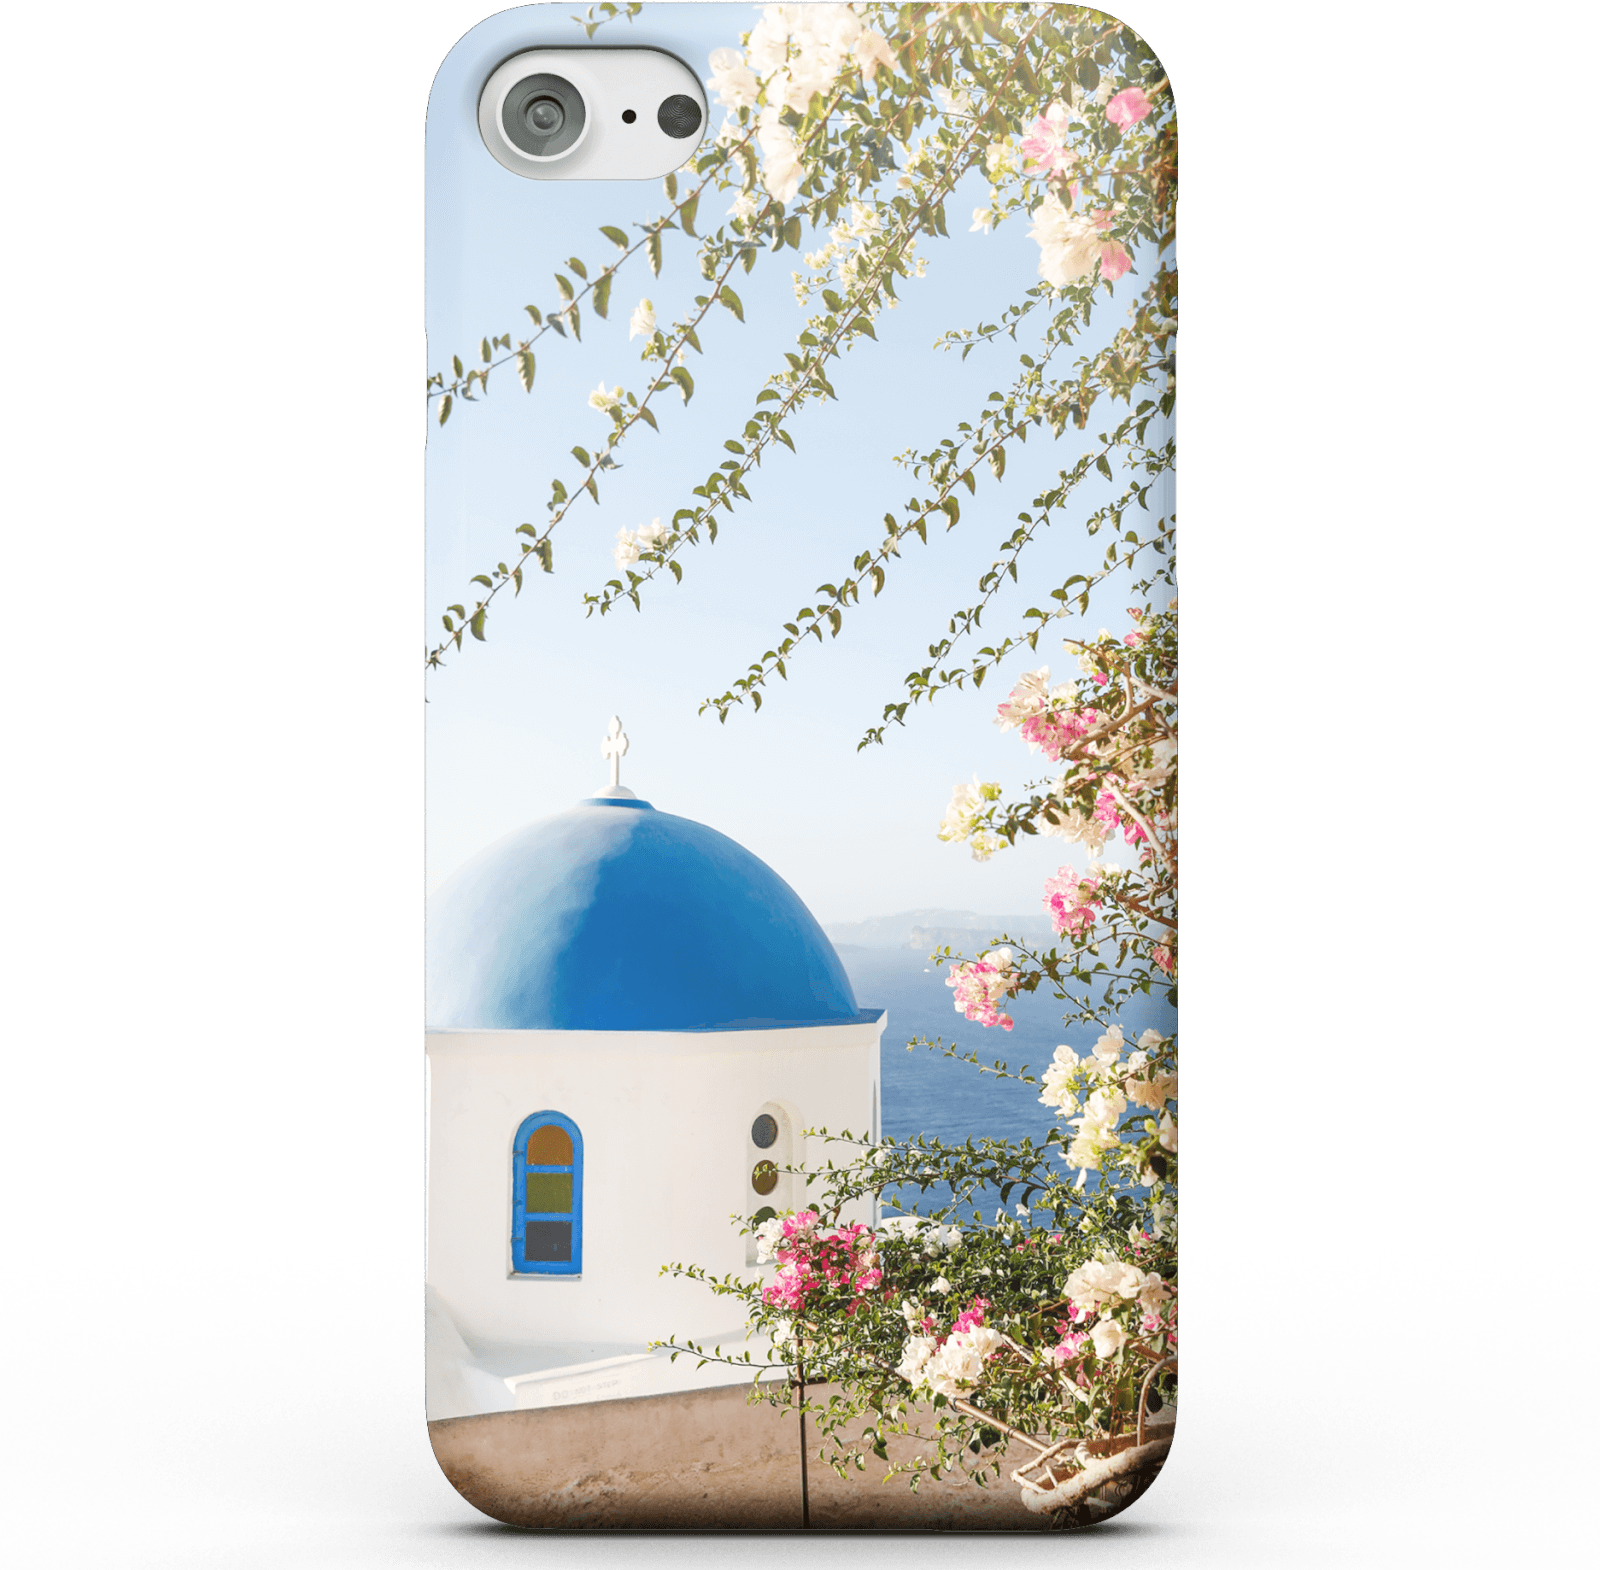 Santorini Views Phone Case for iPhone and Android - iPhone 5/5s - Snap Case - Matte